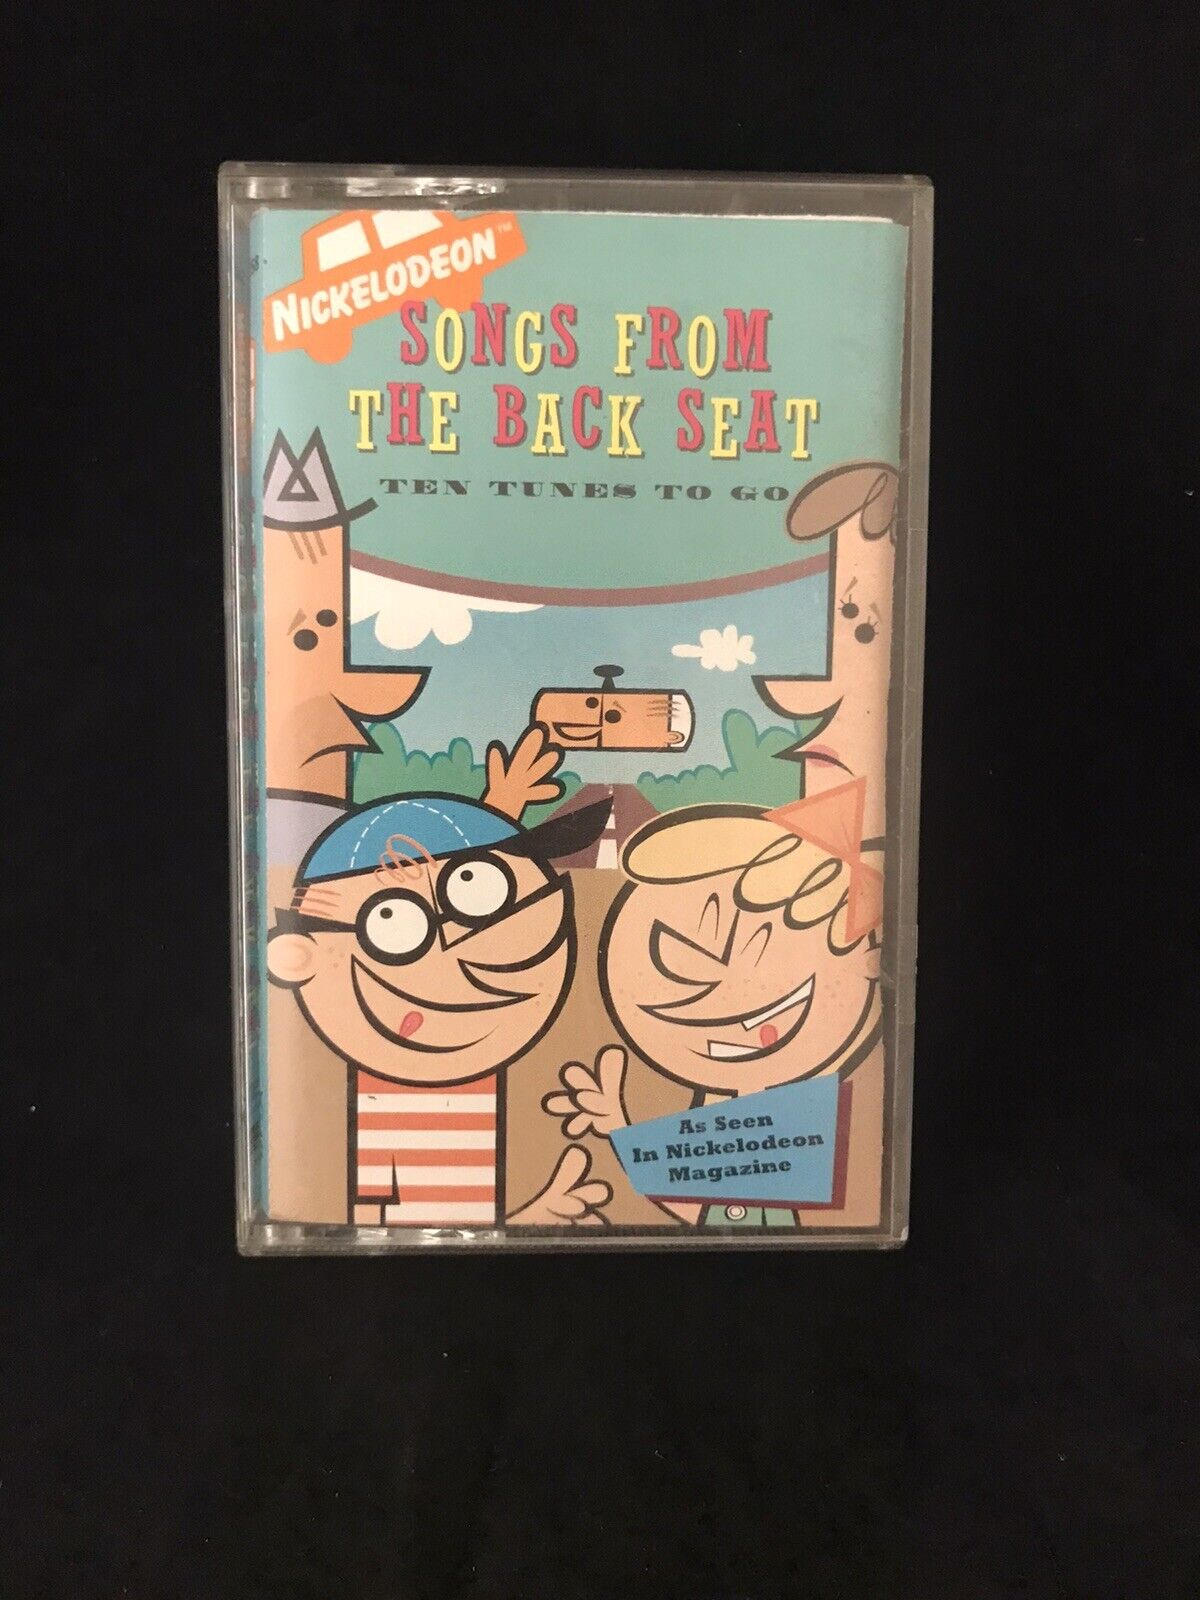 Nickelodeon Songs from the Back Seat (Audio Cassette, 1994) Crazy Rare-Excellent